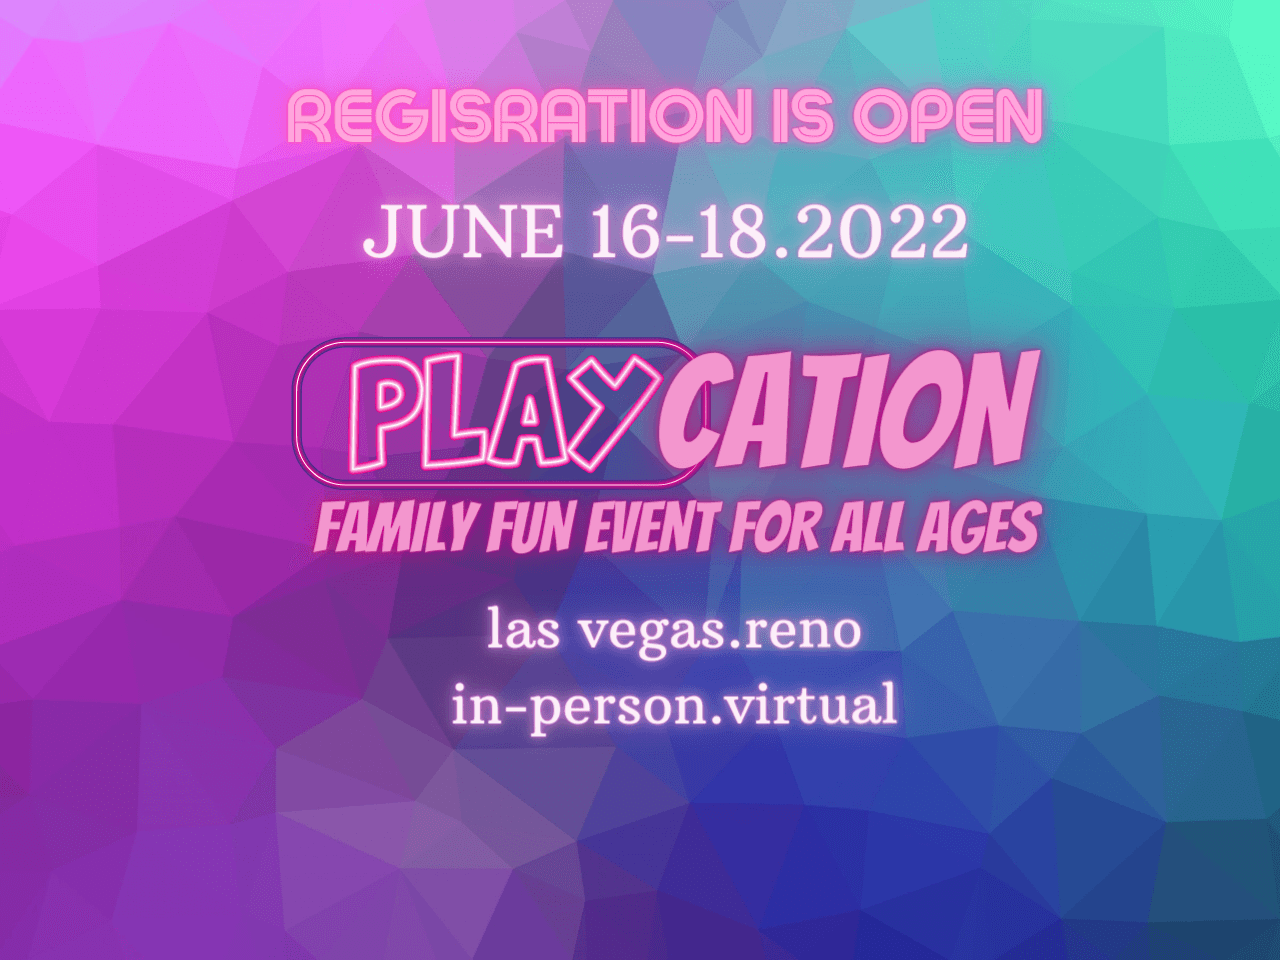 Are you ready for some family fun? You deserve a Playcation! Claim your spot for this exciting summer event.